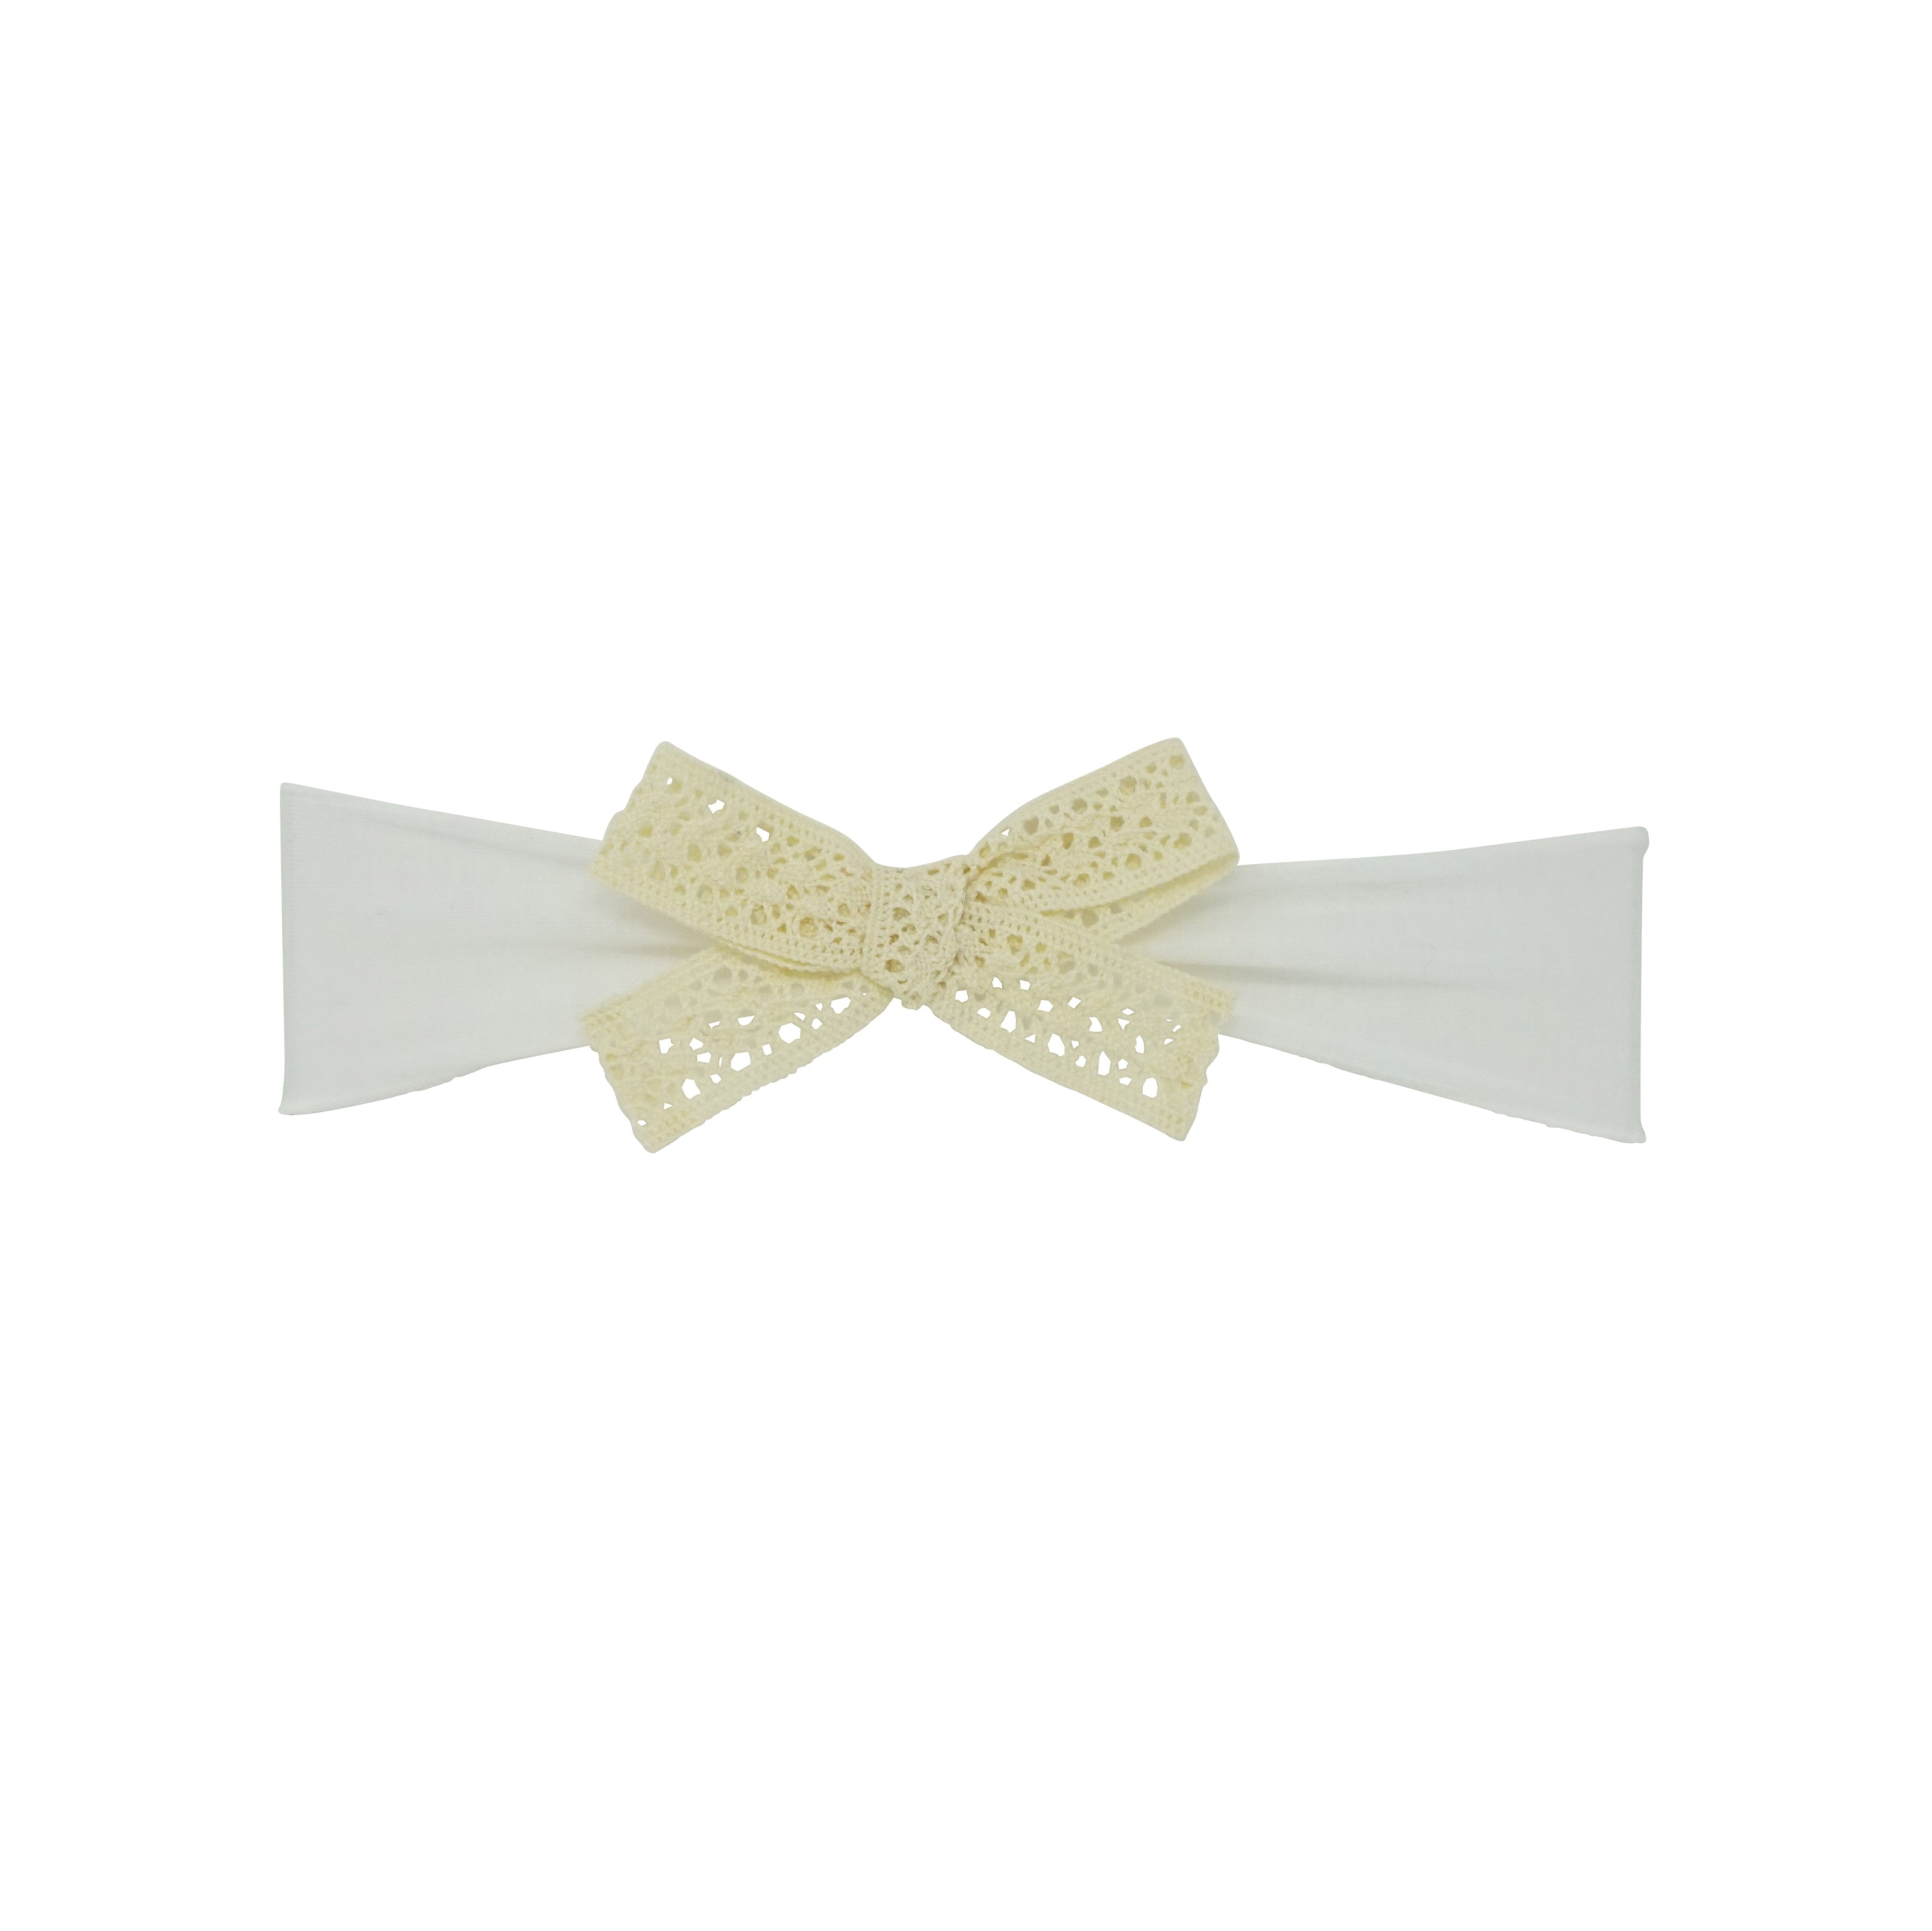 Vintage Lace Bow Baby Band